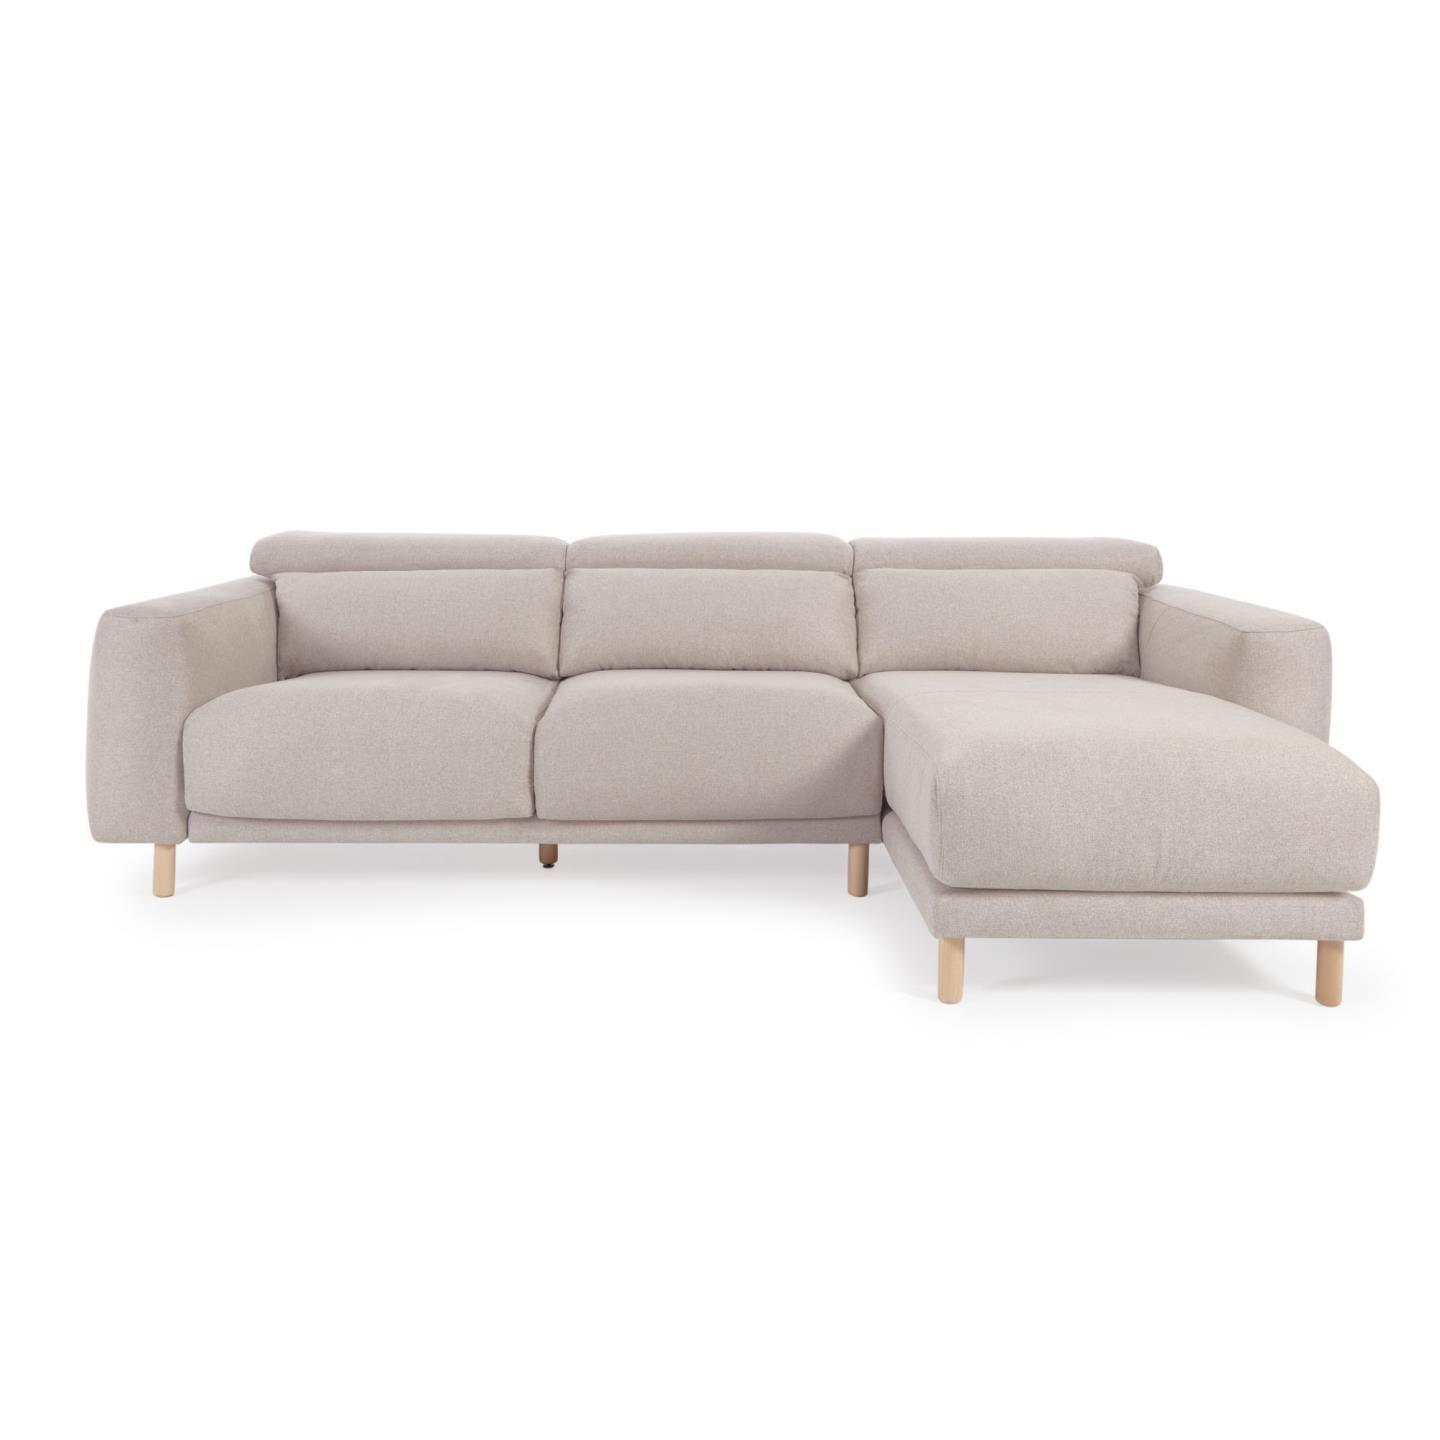 Singa 3 seater sofa with right-hand chaise longue in beige, 296 cm